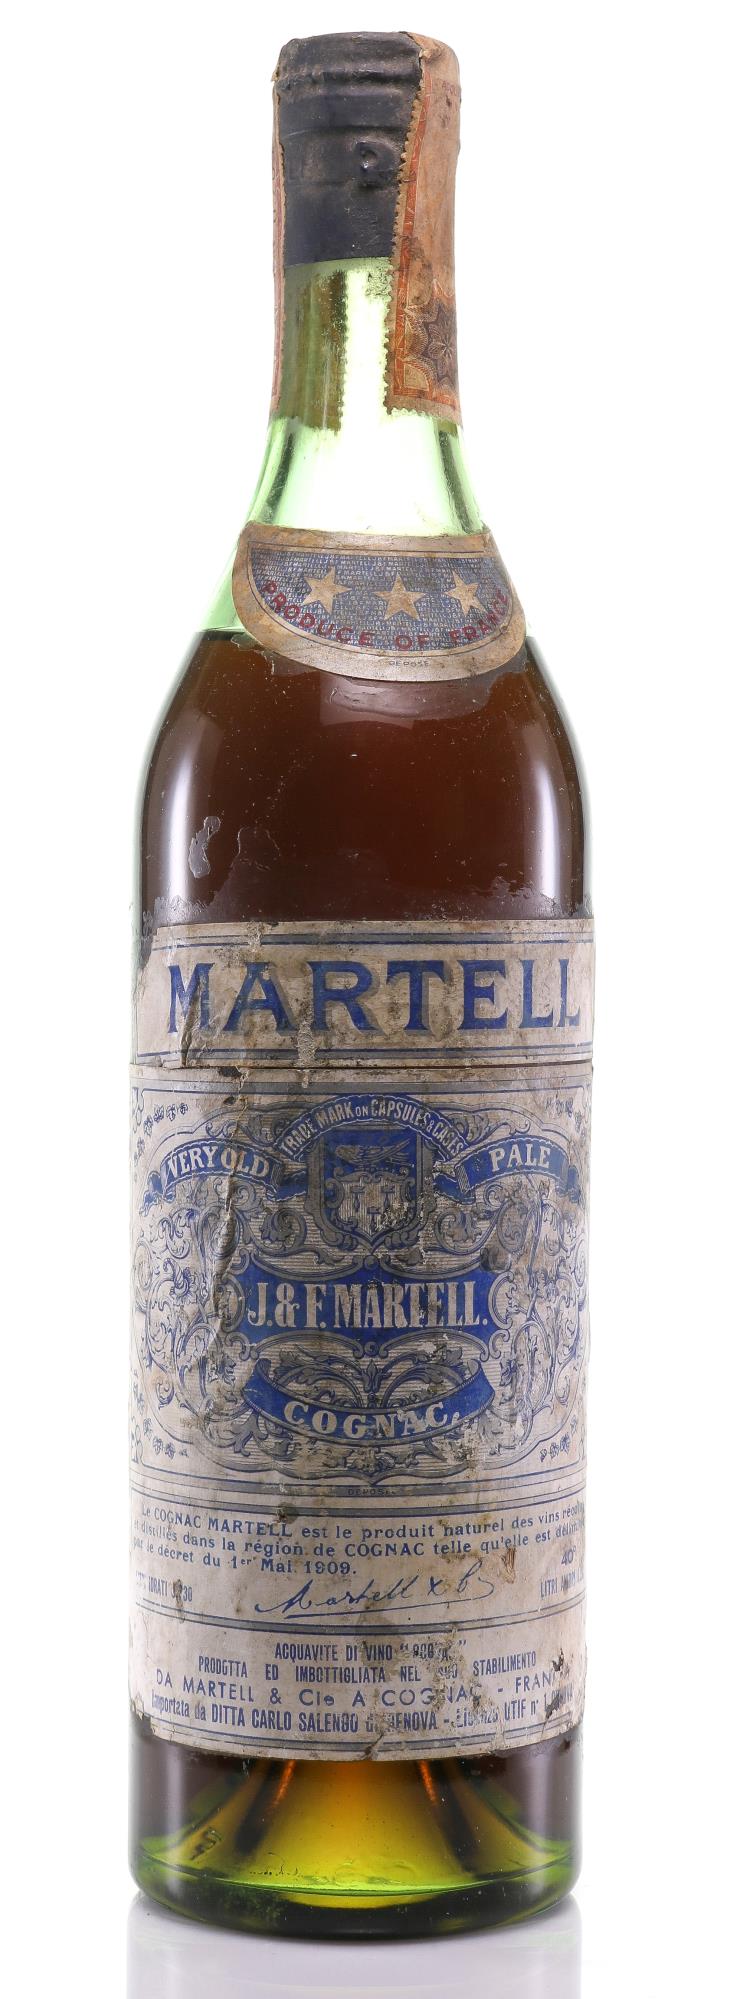 Martell 3 Star Cognac 1960s Very Old Pale - Rue Pinard